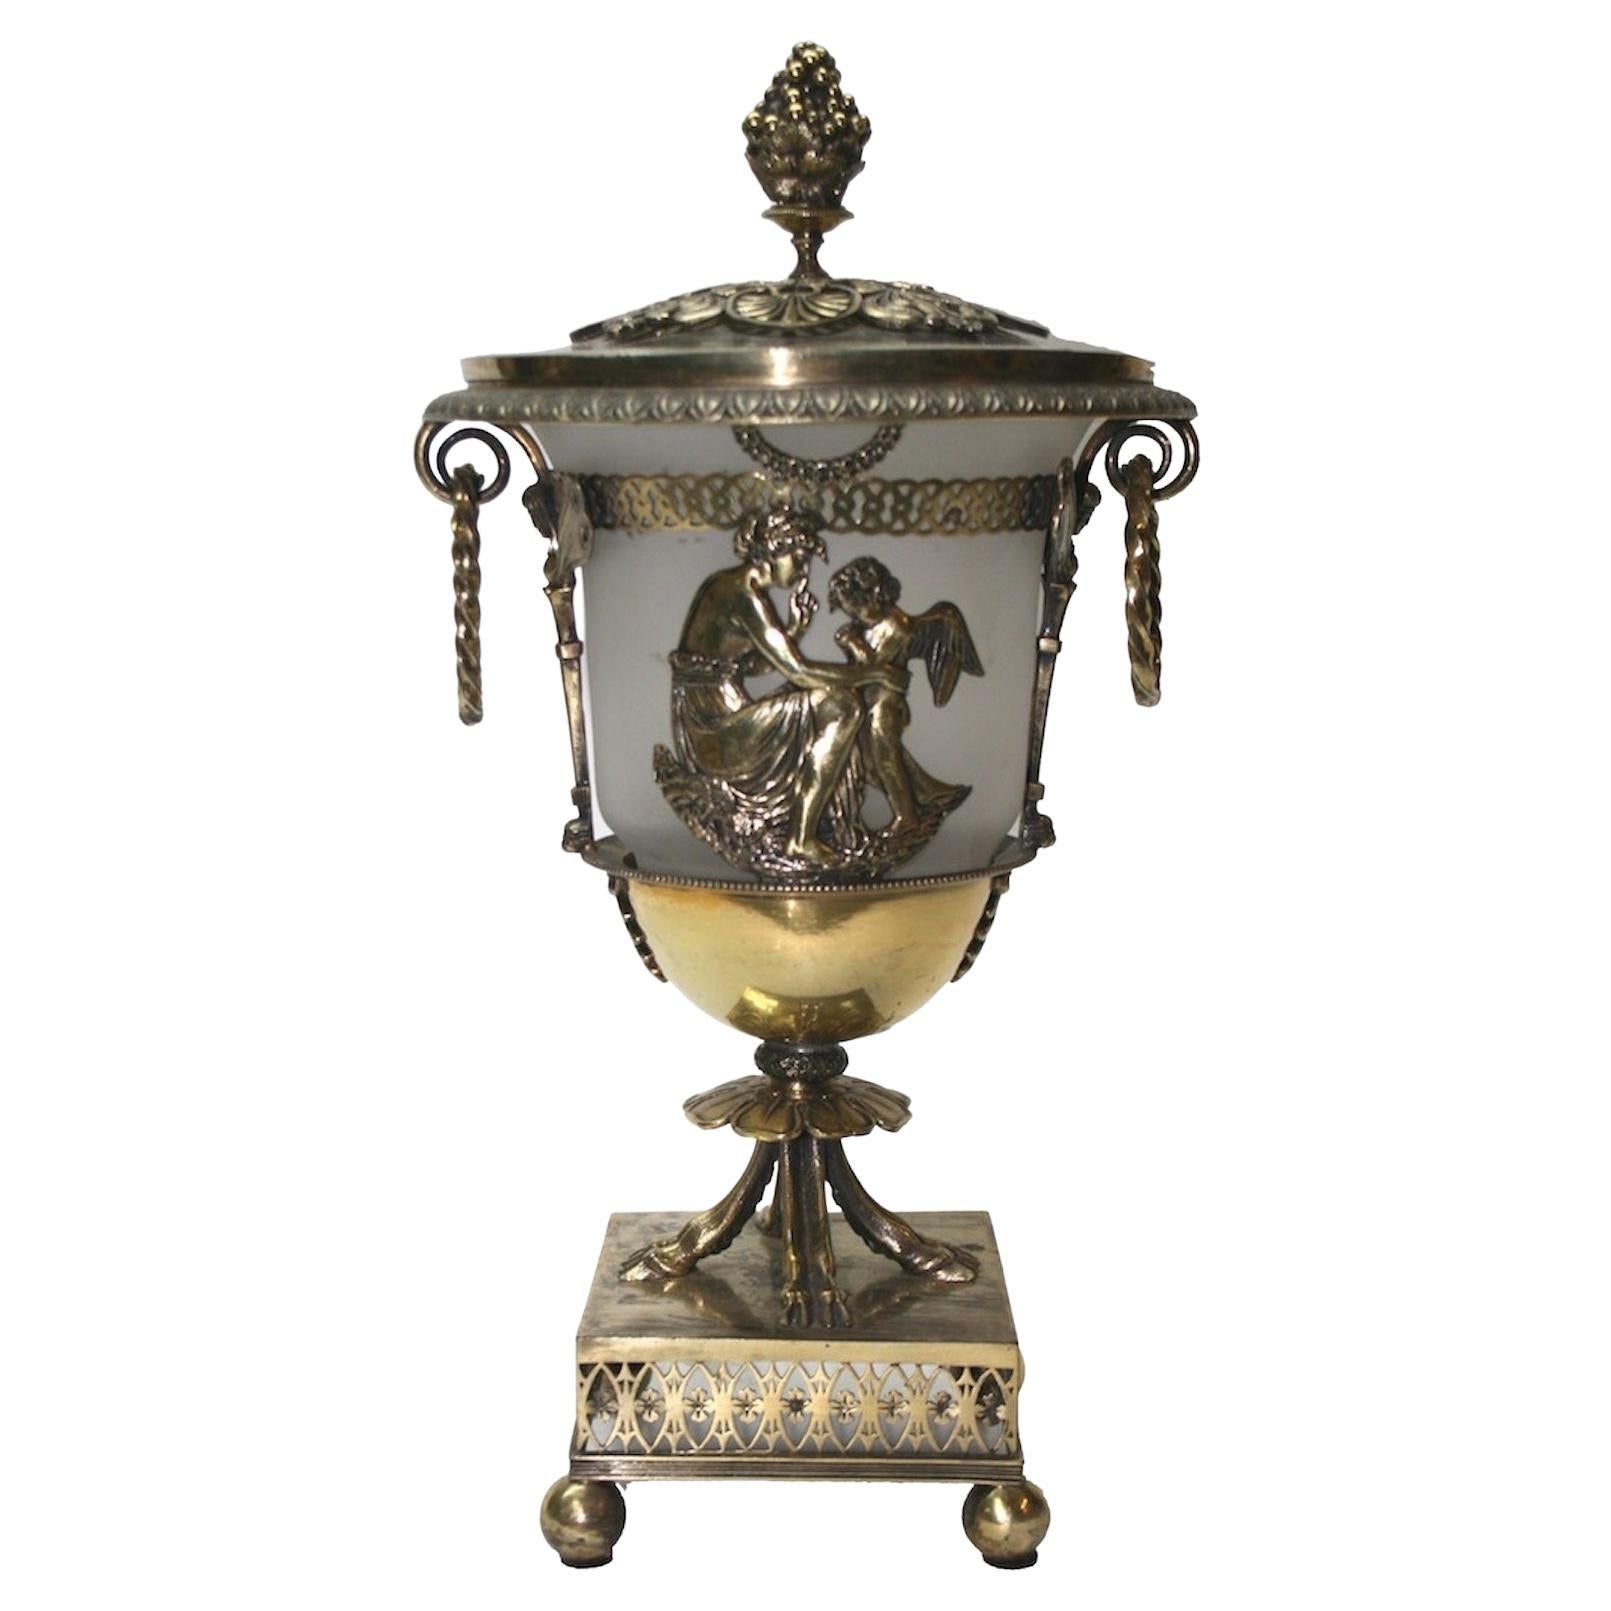 French Gilded Silver Sugar Bowl and Cover, Paris, Early 19th C